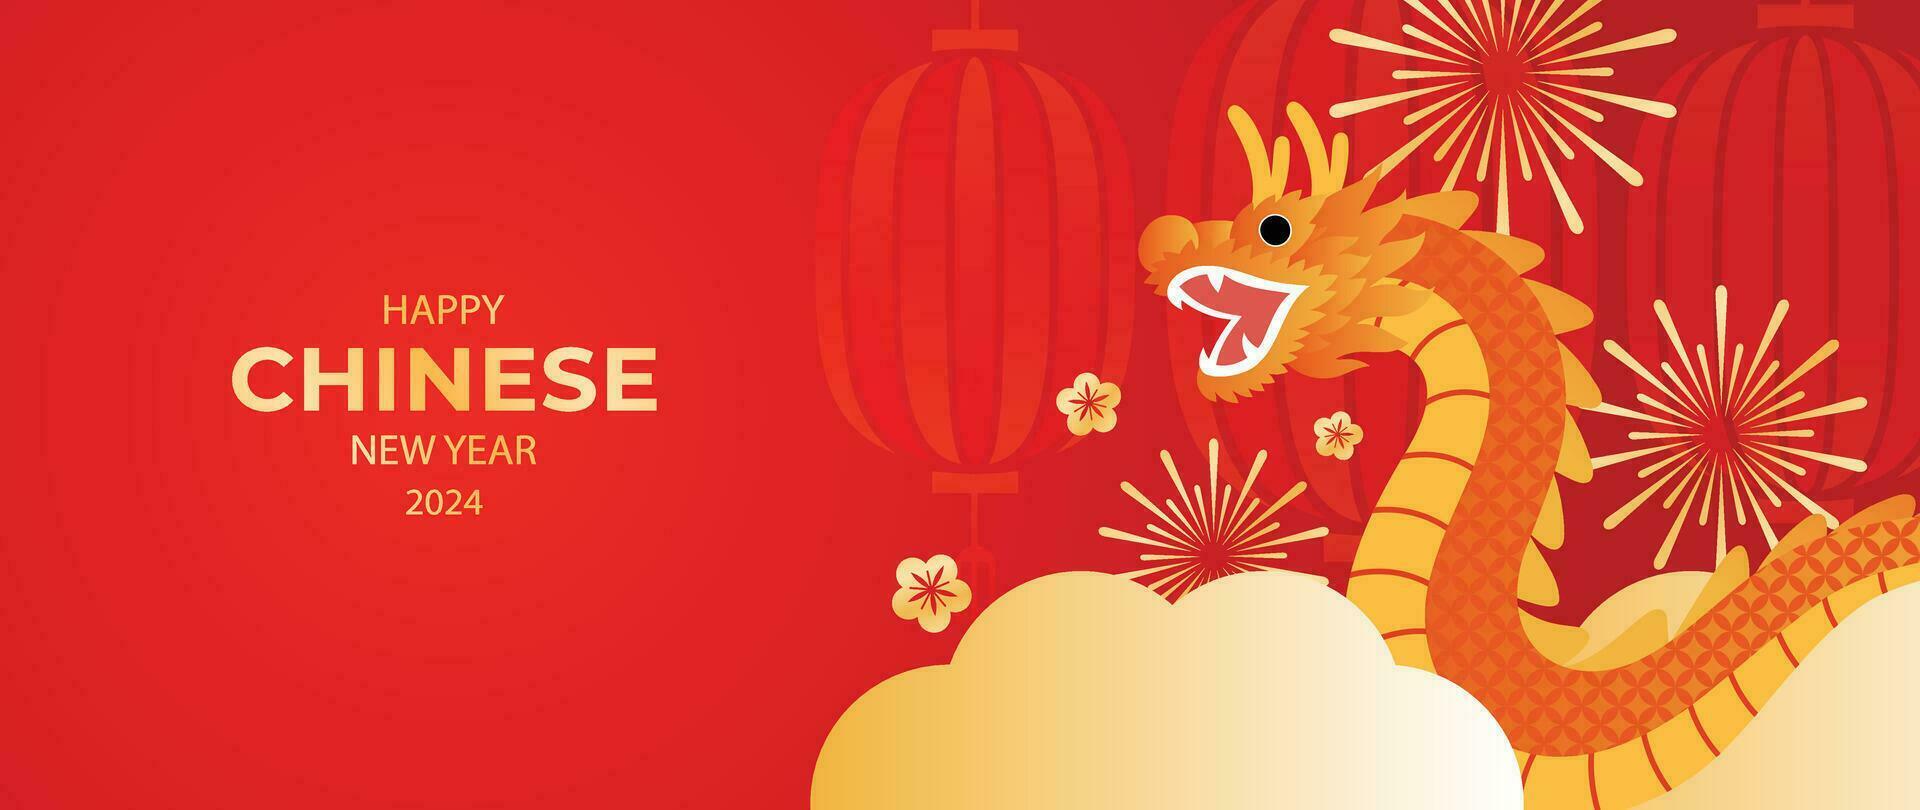 Happy Chinese new year background vector. Year of the dragon design wallpaper with dragon, chinese lantern, cloud, flower. Modern luxury oriental illustration for cover, banner, website, decor. vector